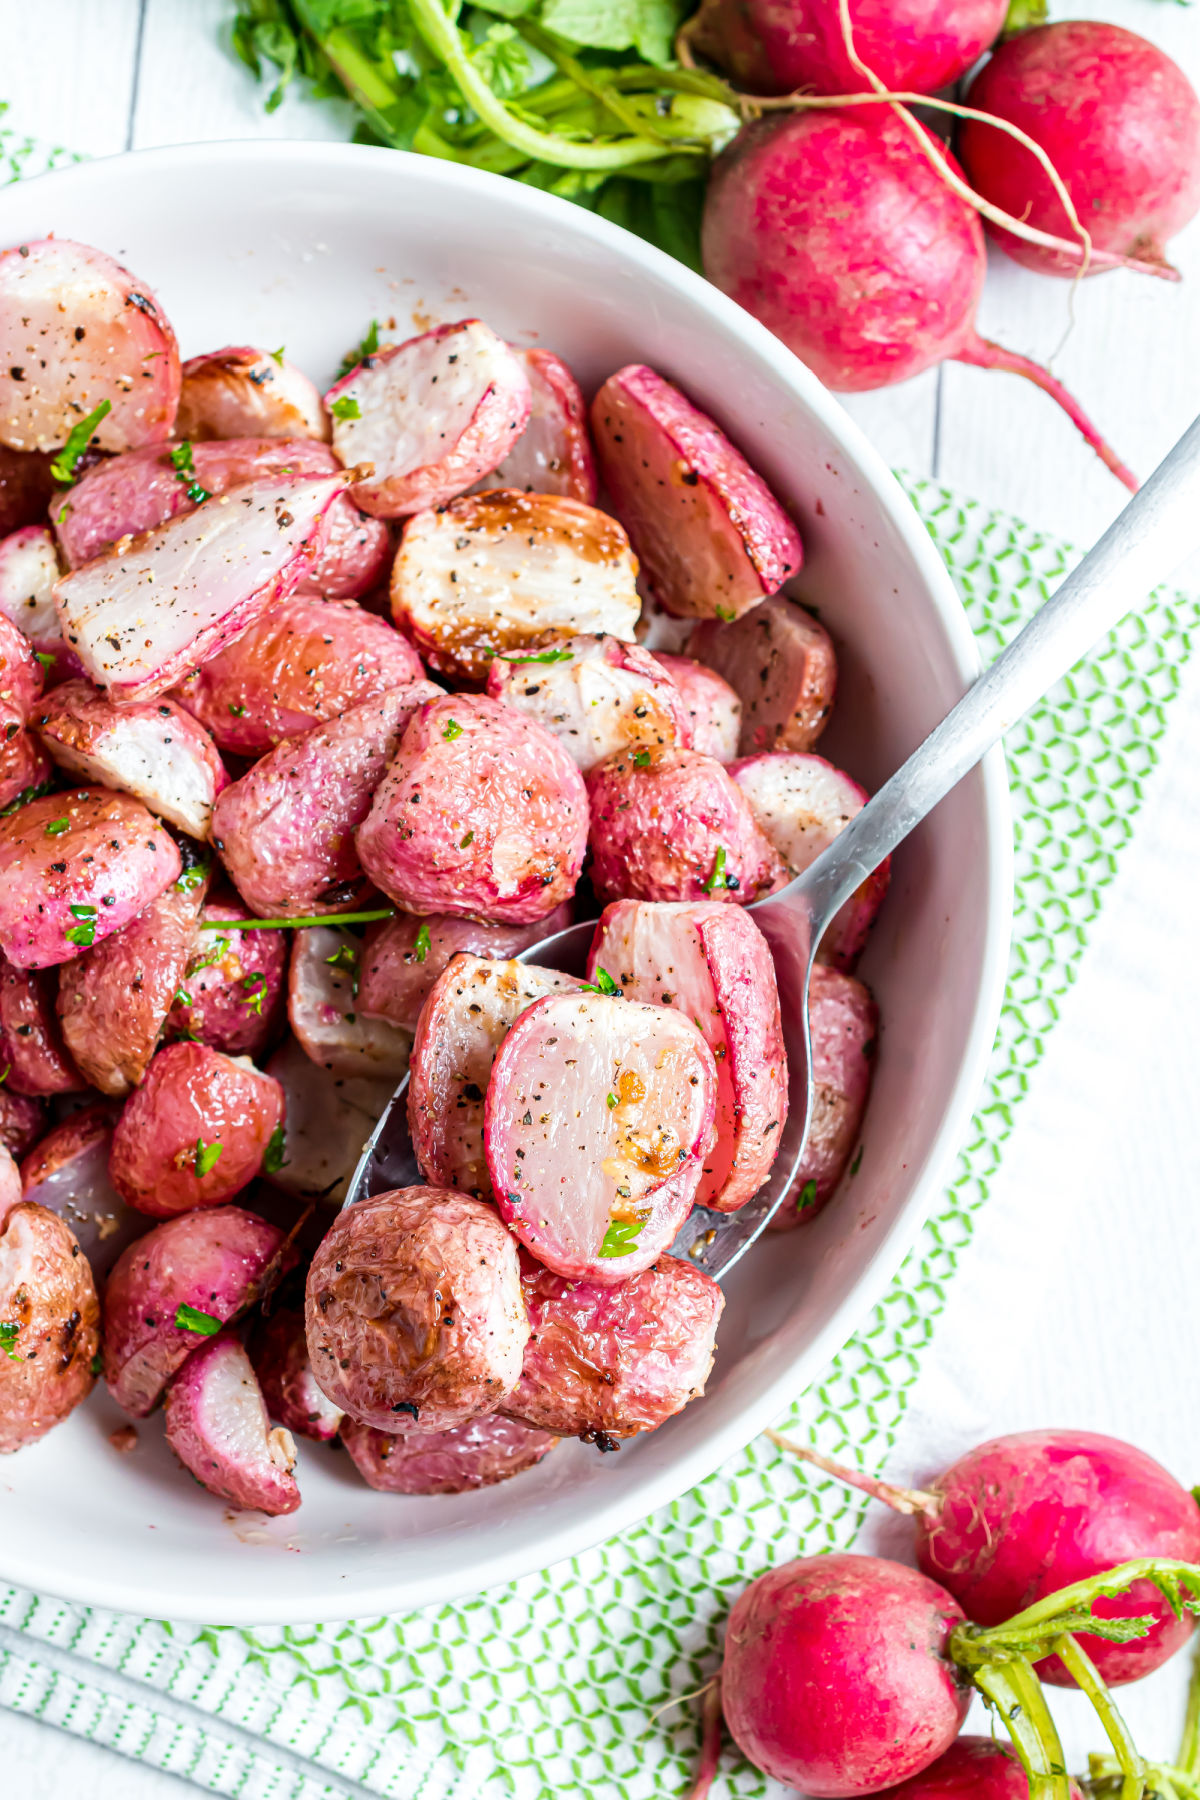 Roasted radishes served in a white bowl.